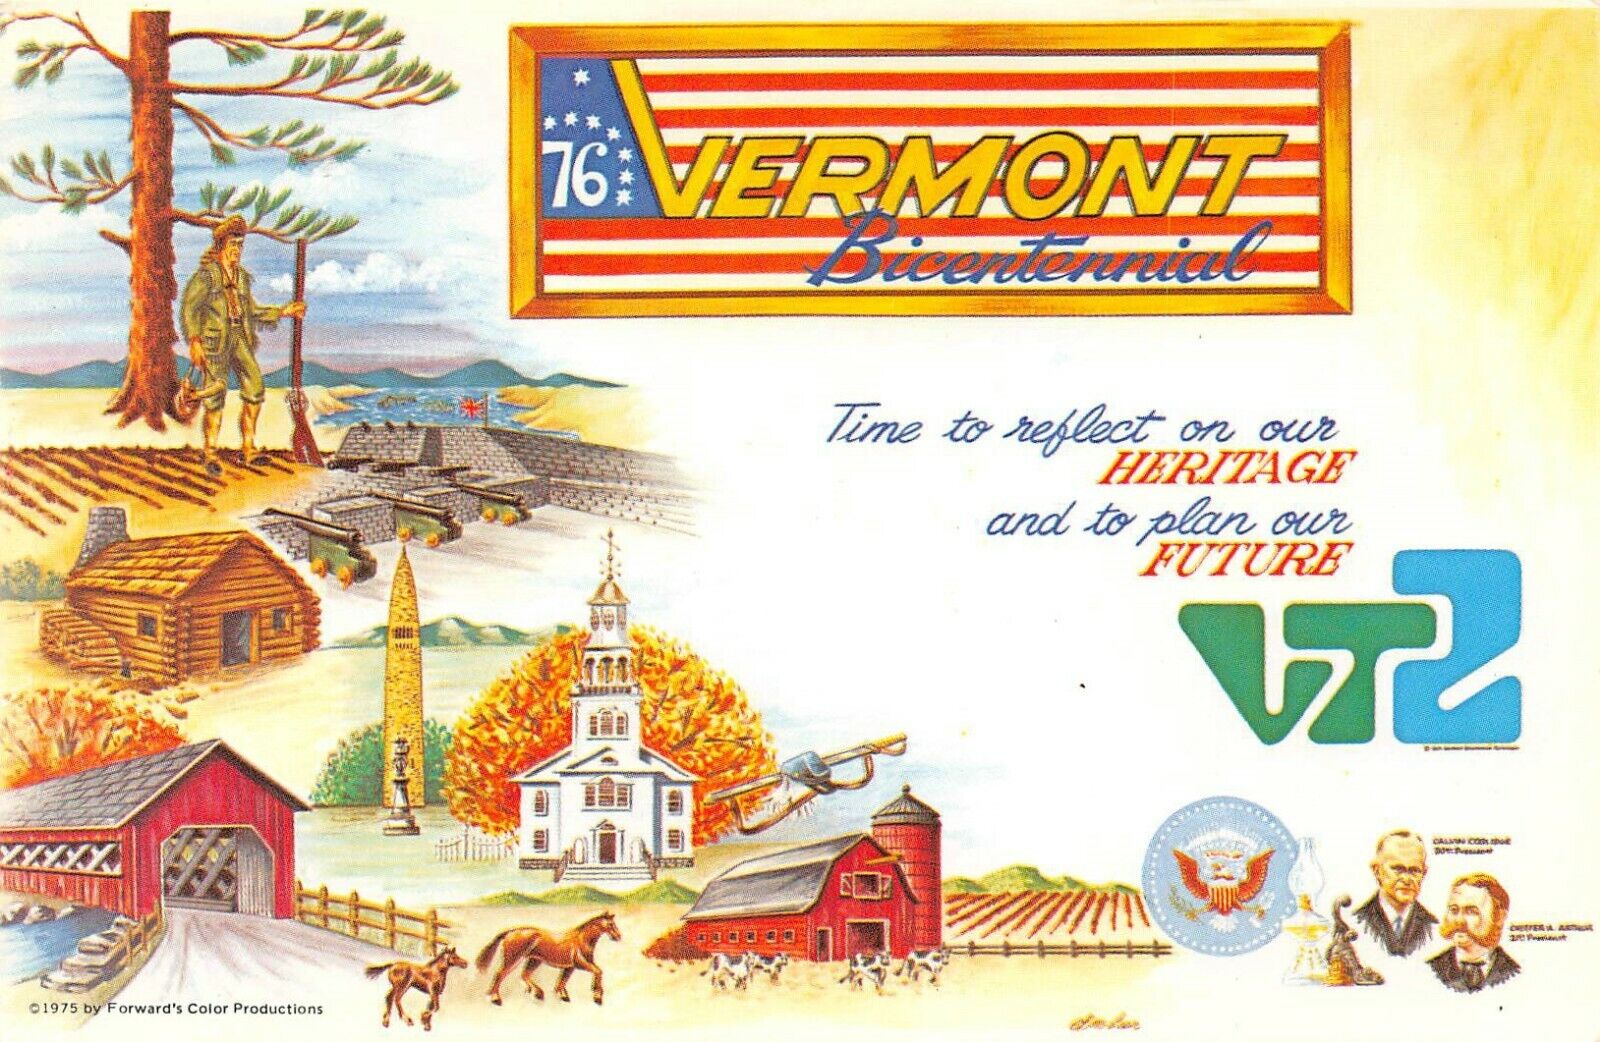 76 Vermont Bicentennial Time To Reflect On Our Heritage ,VT 1976 Art Postcard 